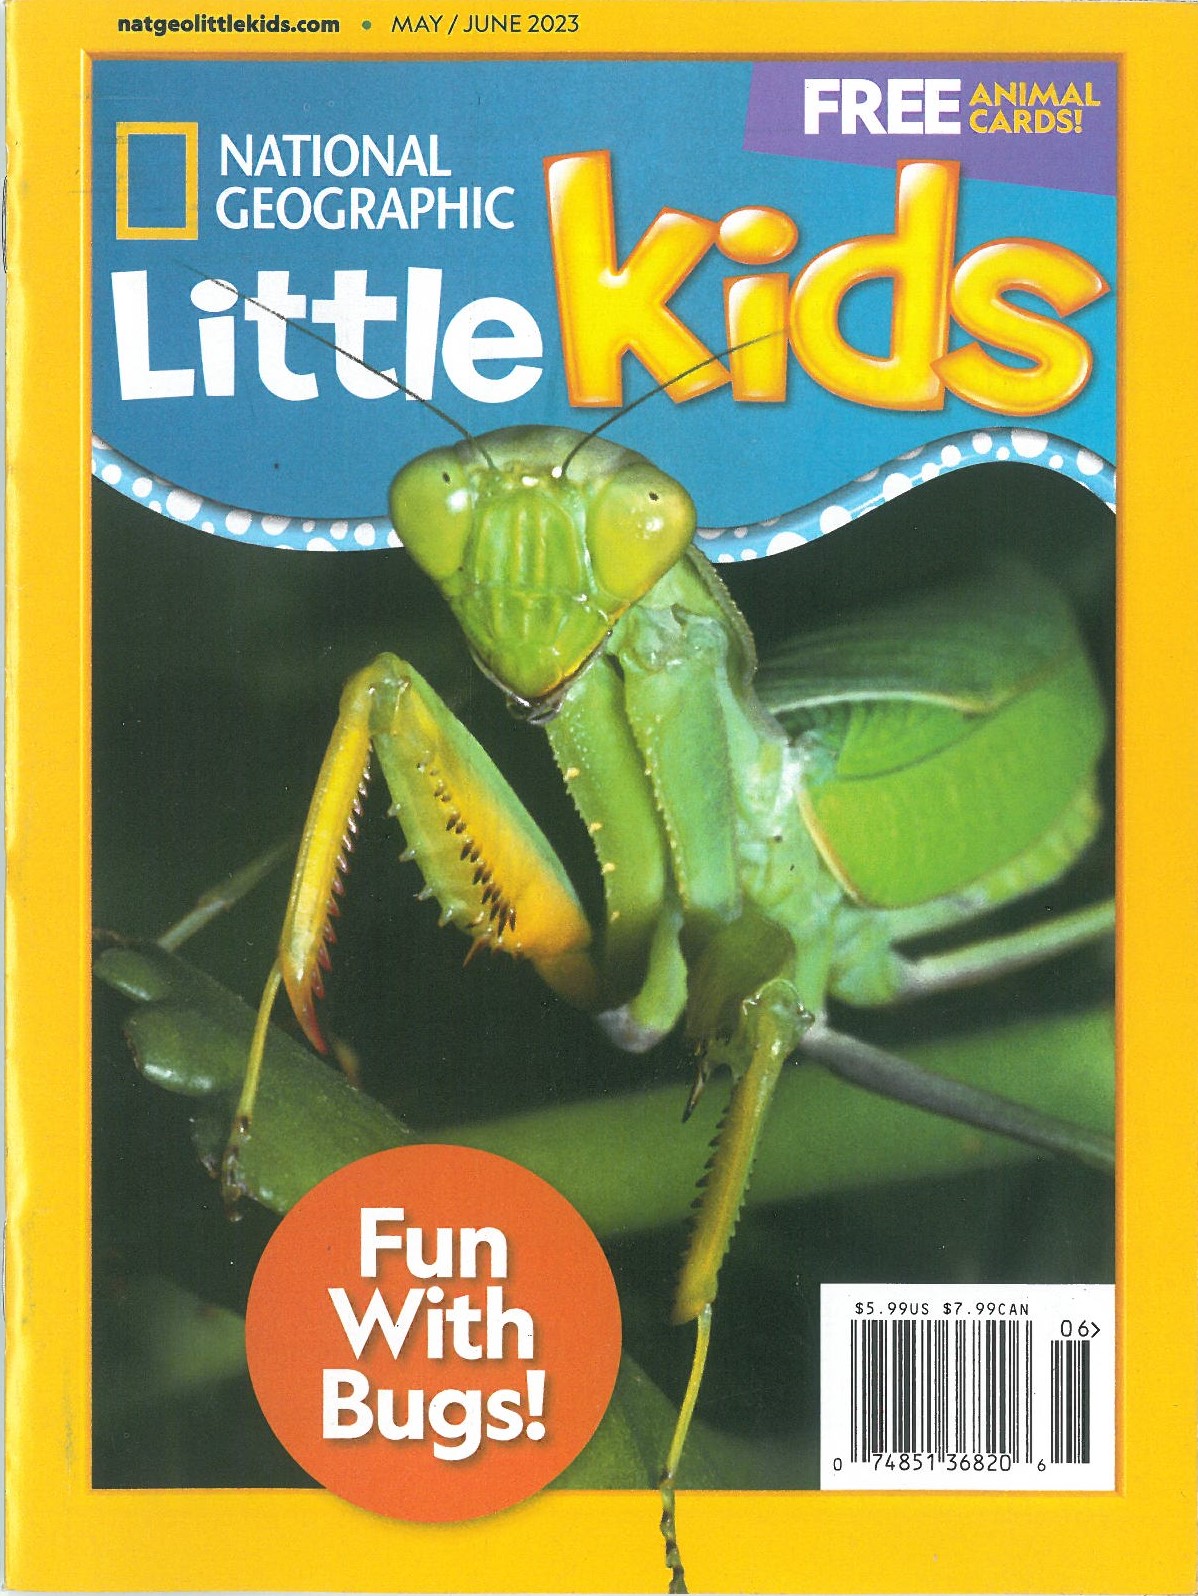 NATIONAL GEOGRAPHIC LITTLE KIDS ISSUE OF SEPTEMBER/OCTOBER 2022